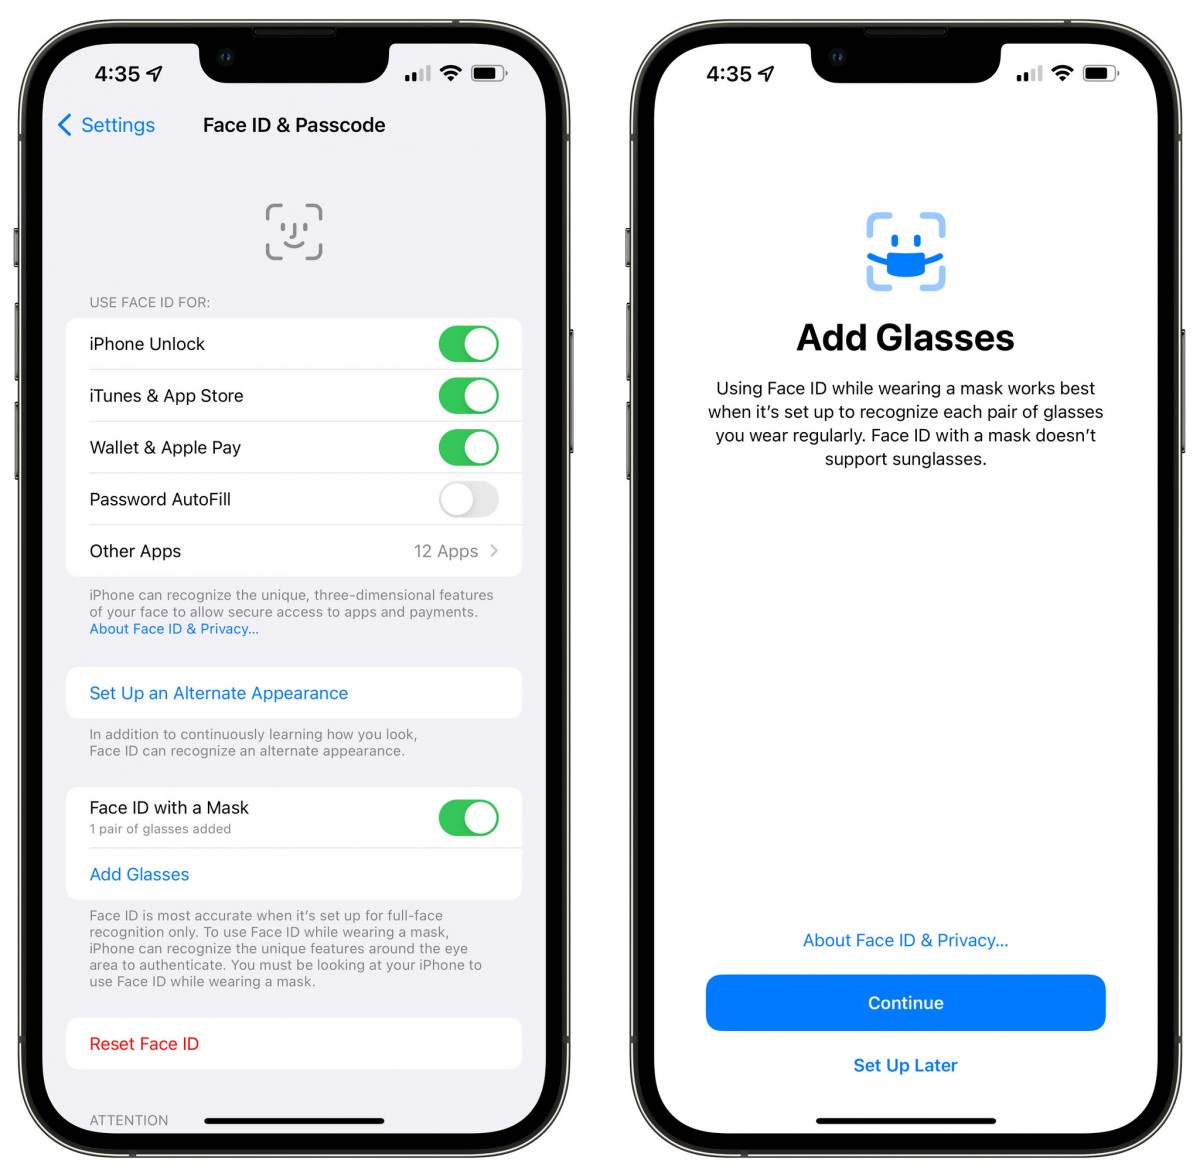 Apple releases iOS 15.4 with Face ID that works while wearing a mask